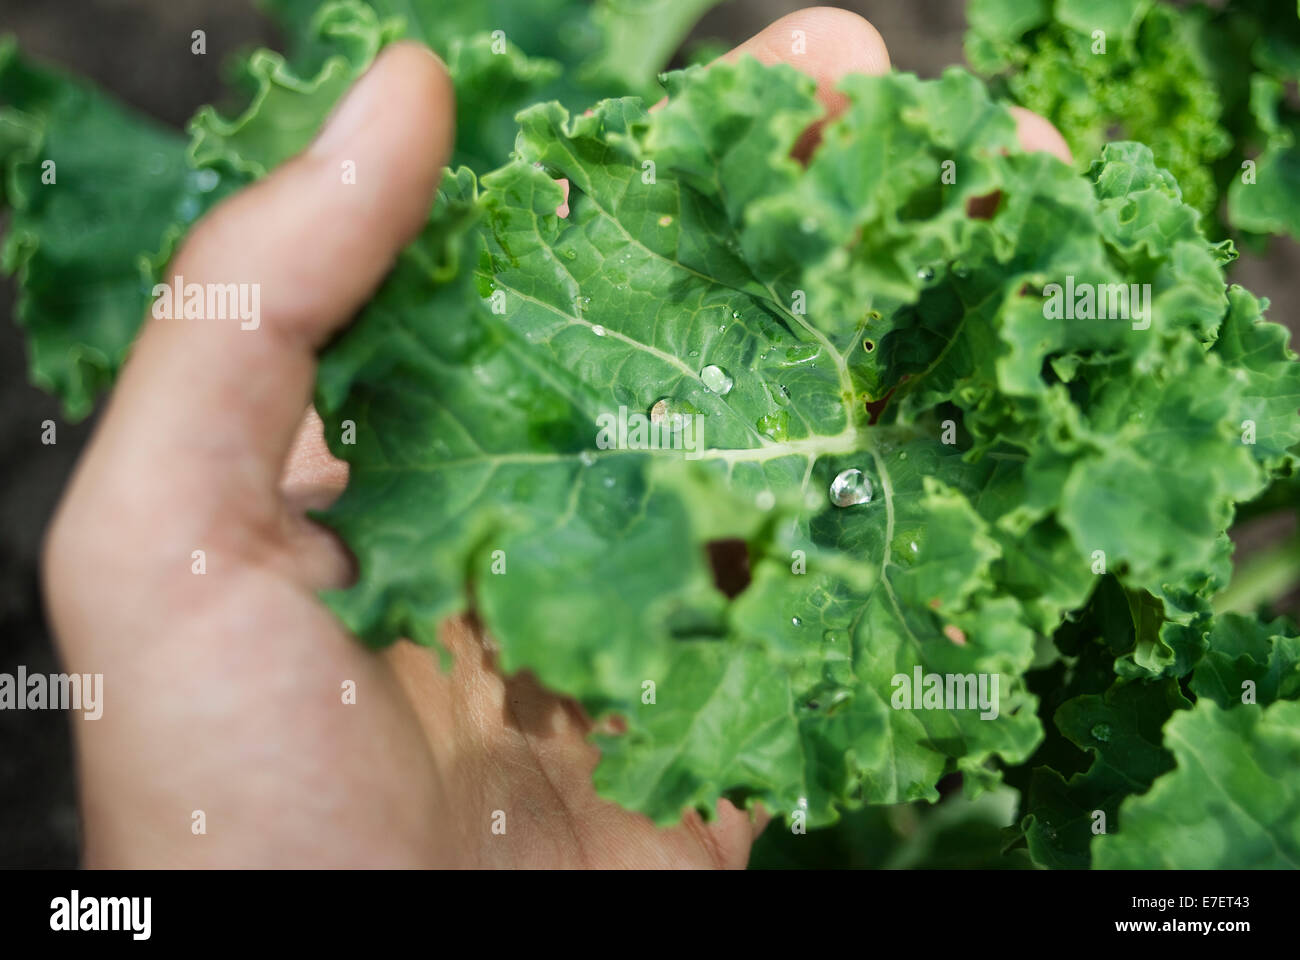 Farmer holding young broccoli leaf. Organic plantation. Hands only. Stock Photo